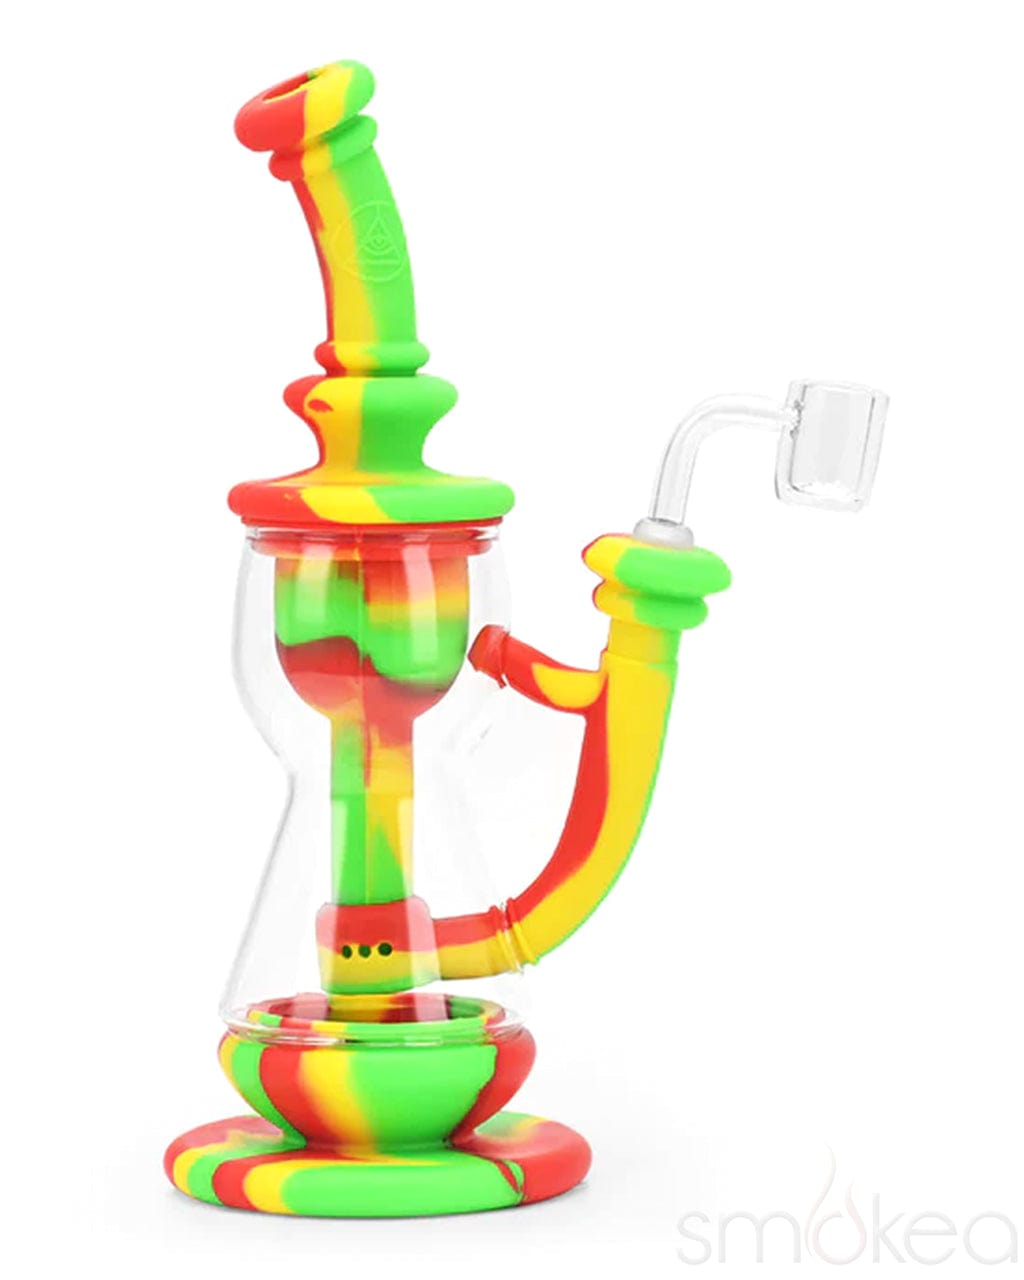 Real Rugged Silicone Dab Rig